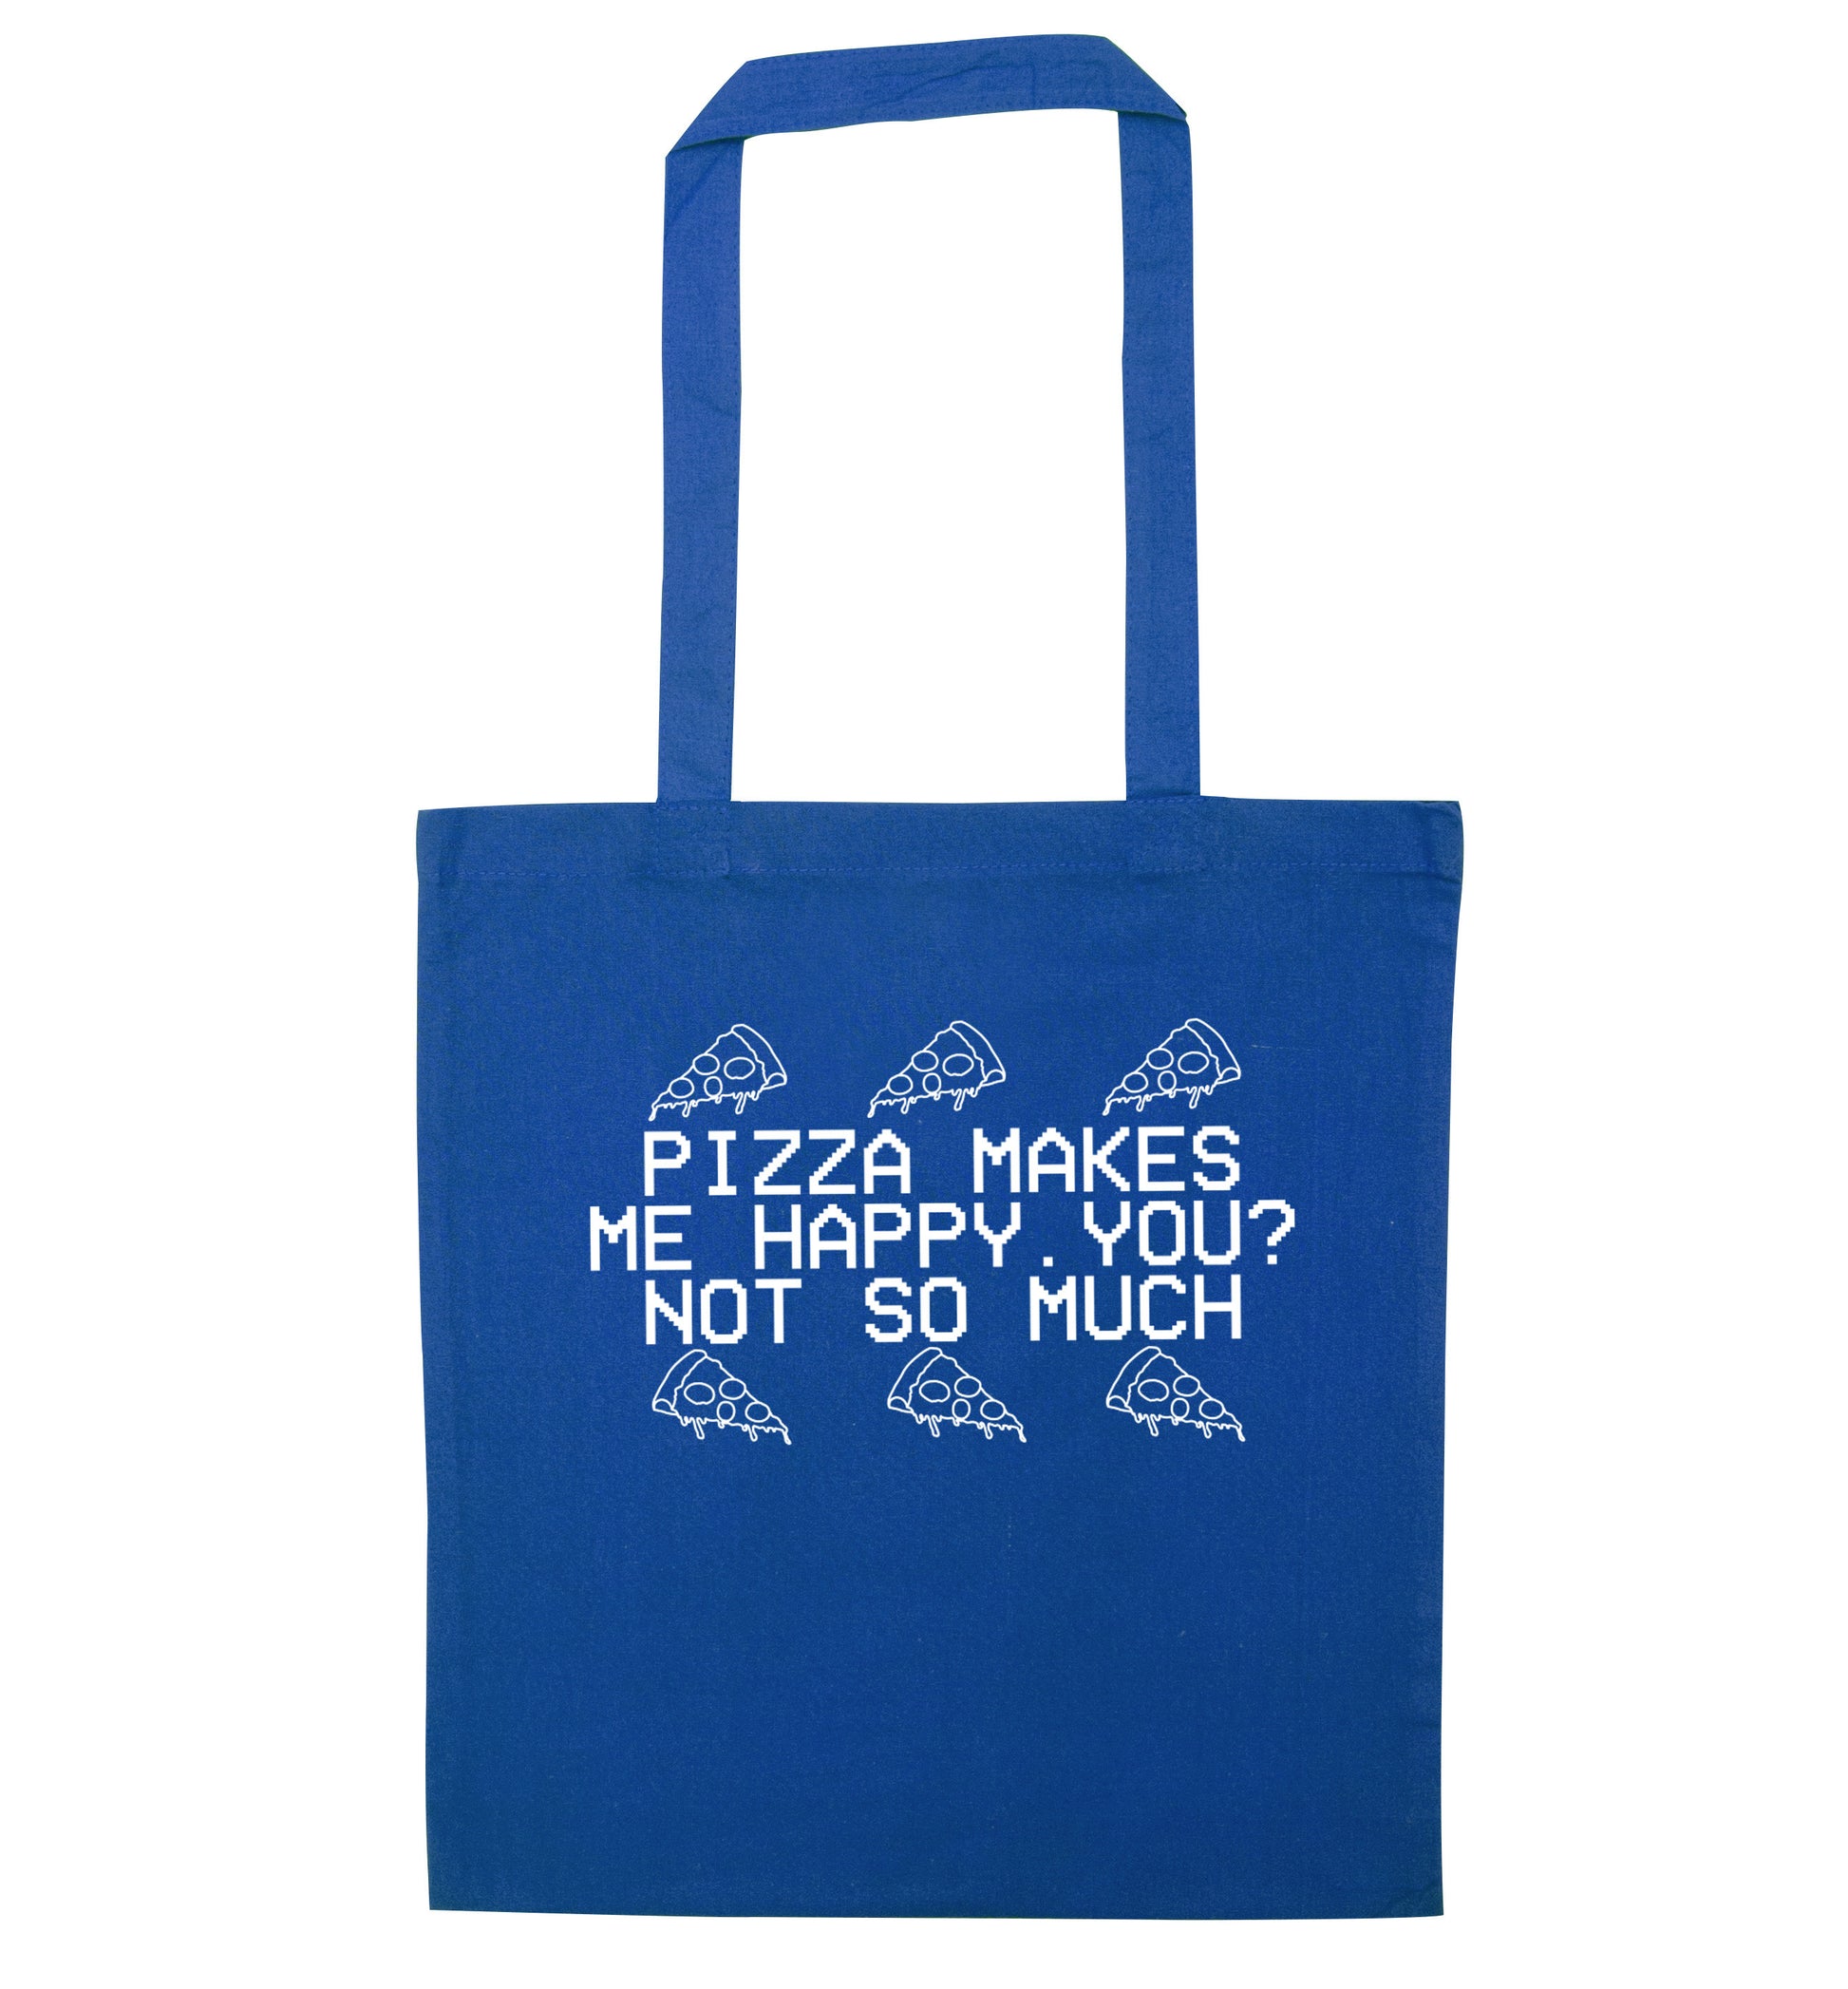 Pizza makes me happy, You? Not so much blue tote bag